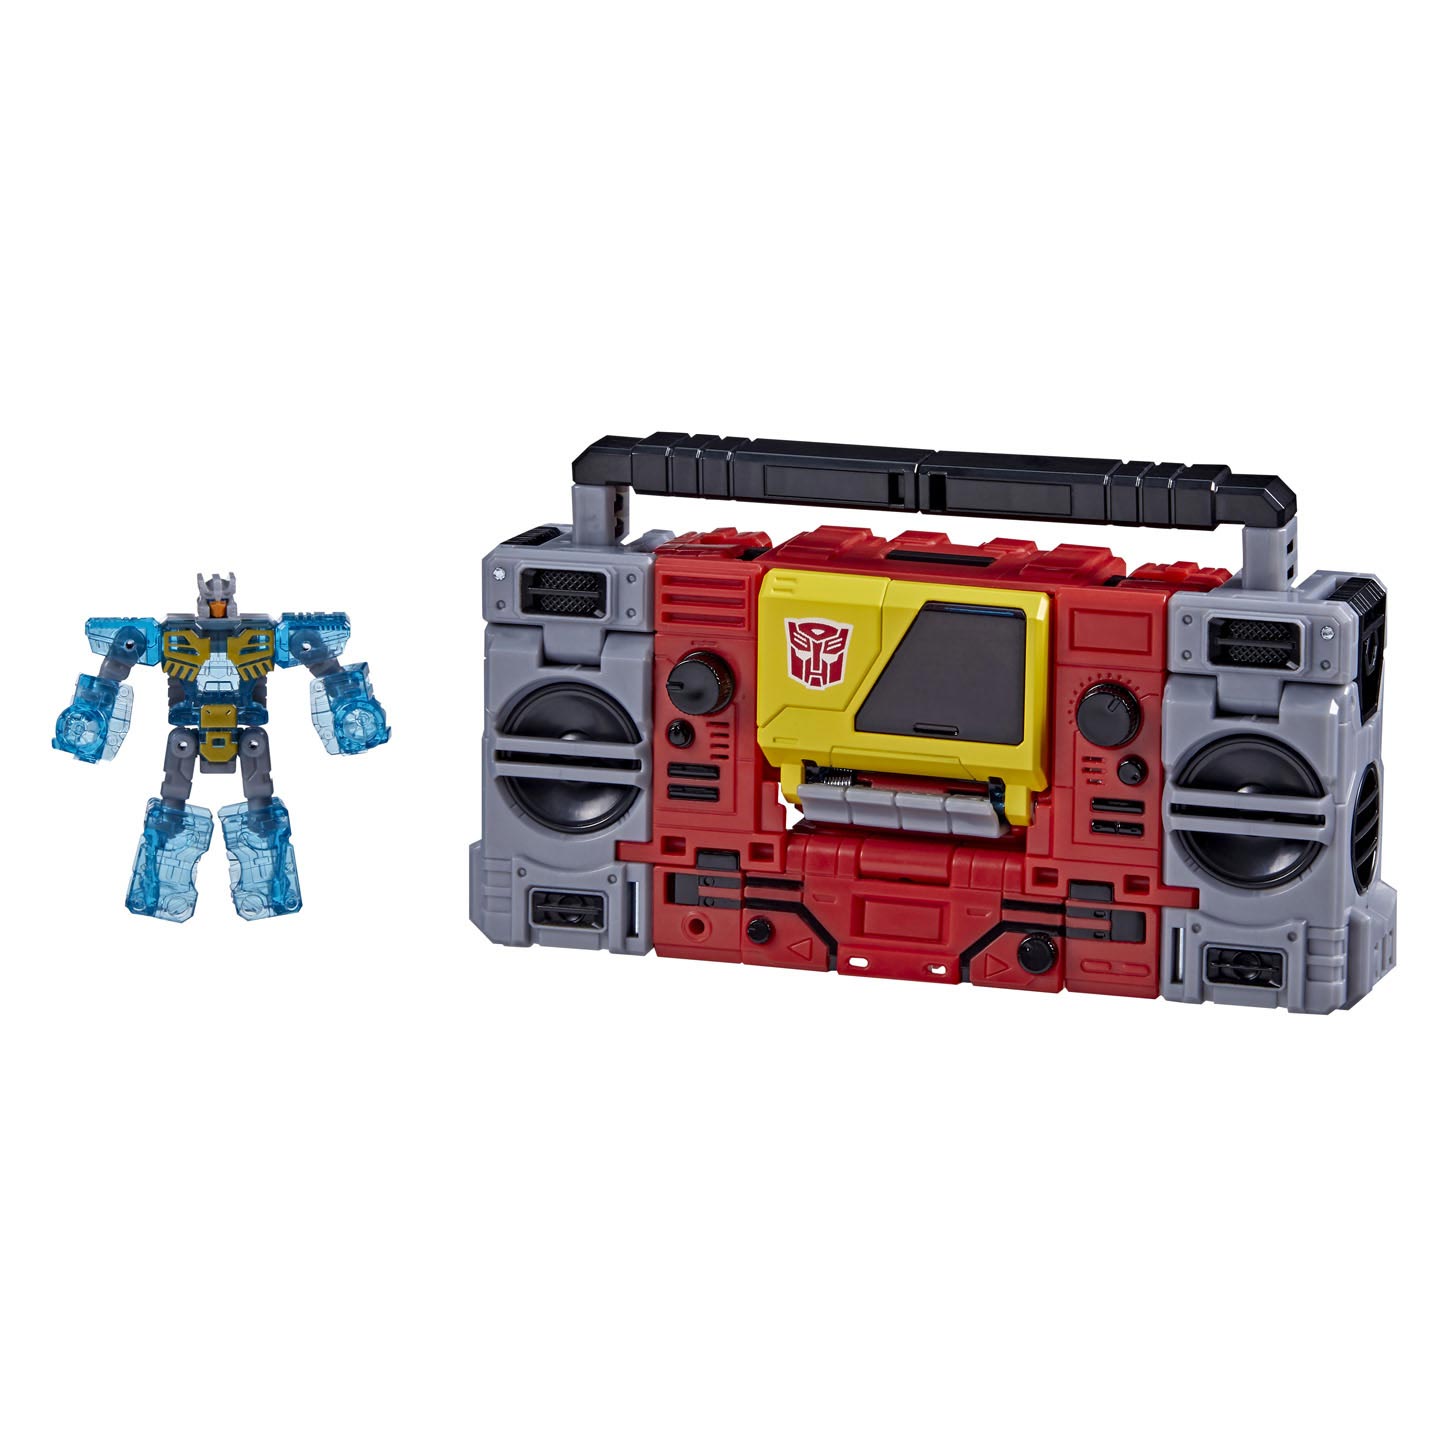 Transformers Autobot Blaster & Eject, 18cm